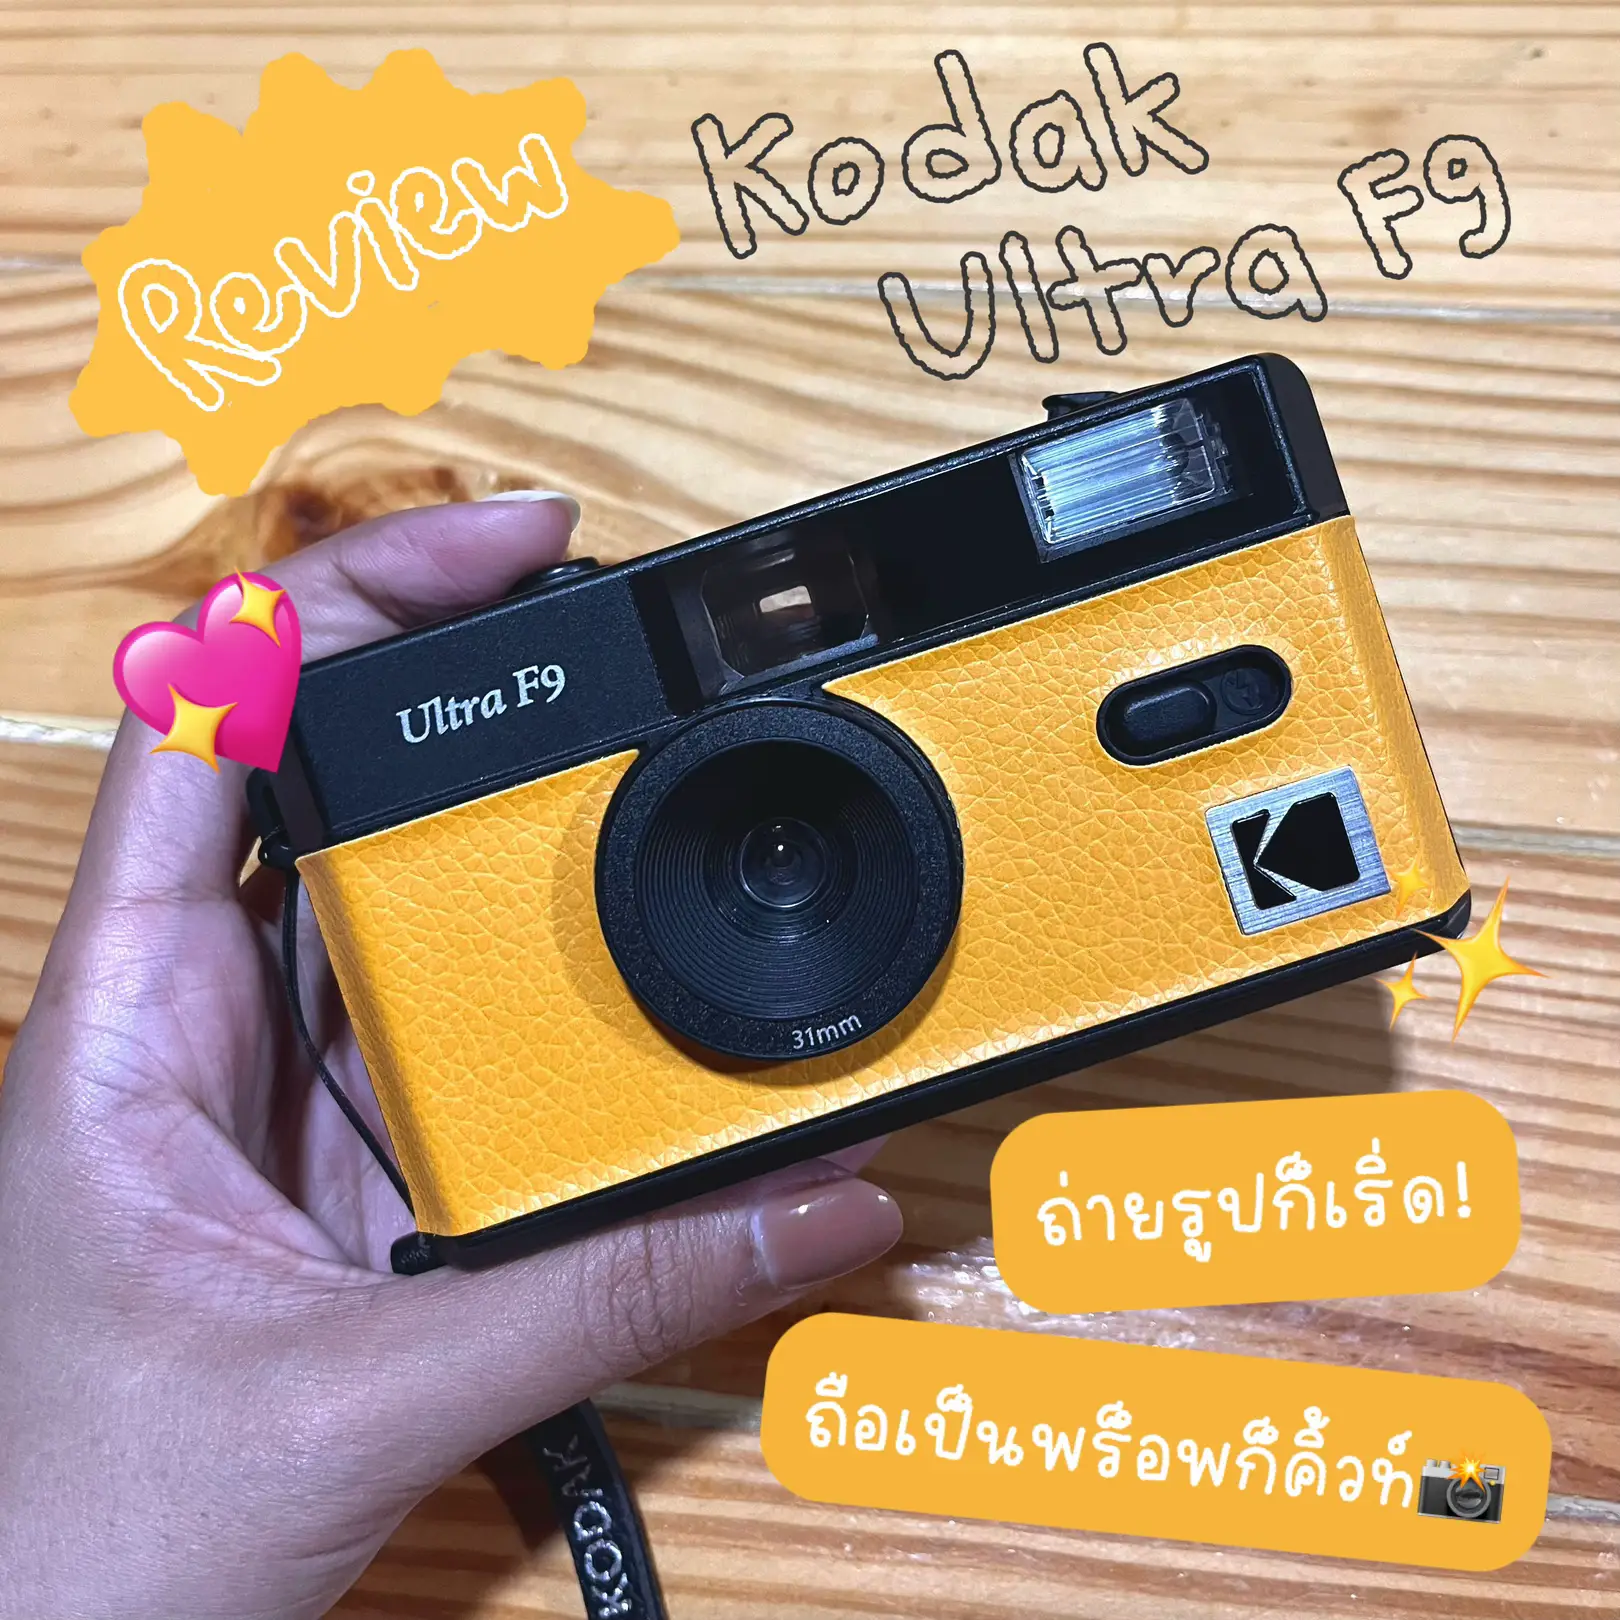 Kodak Ultra f9: How to Use + Sample Images 